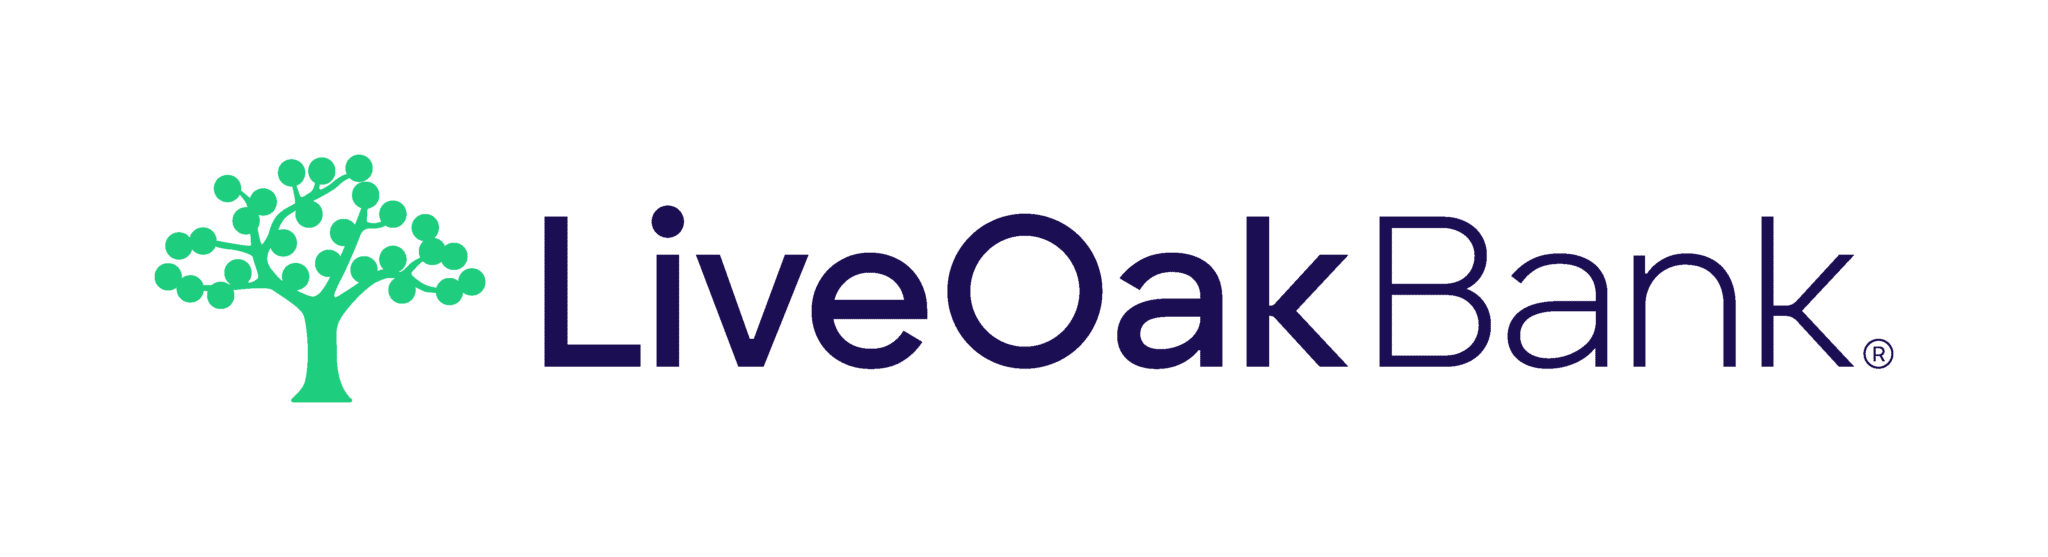 best business checking account: live oak bank small business checking